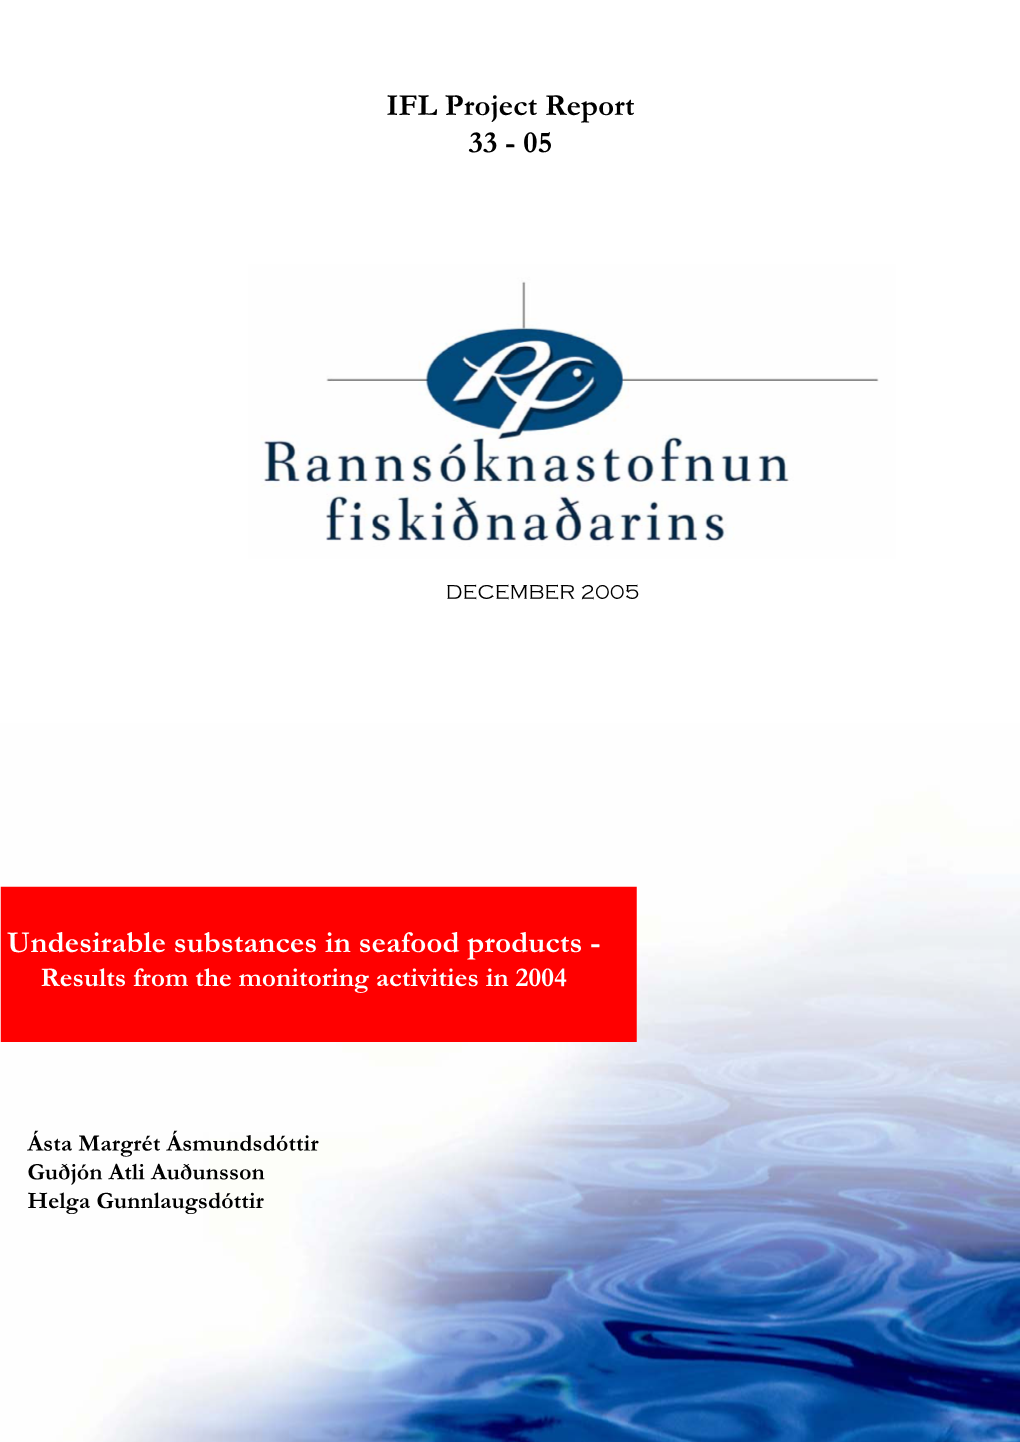 Undesirable Substances in Seafood Products - Results from the Monitoring Activities in 2004